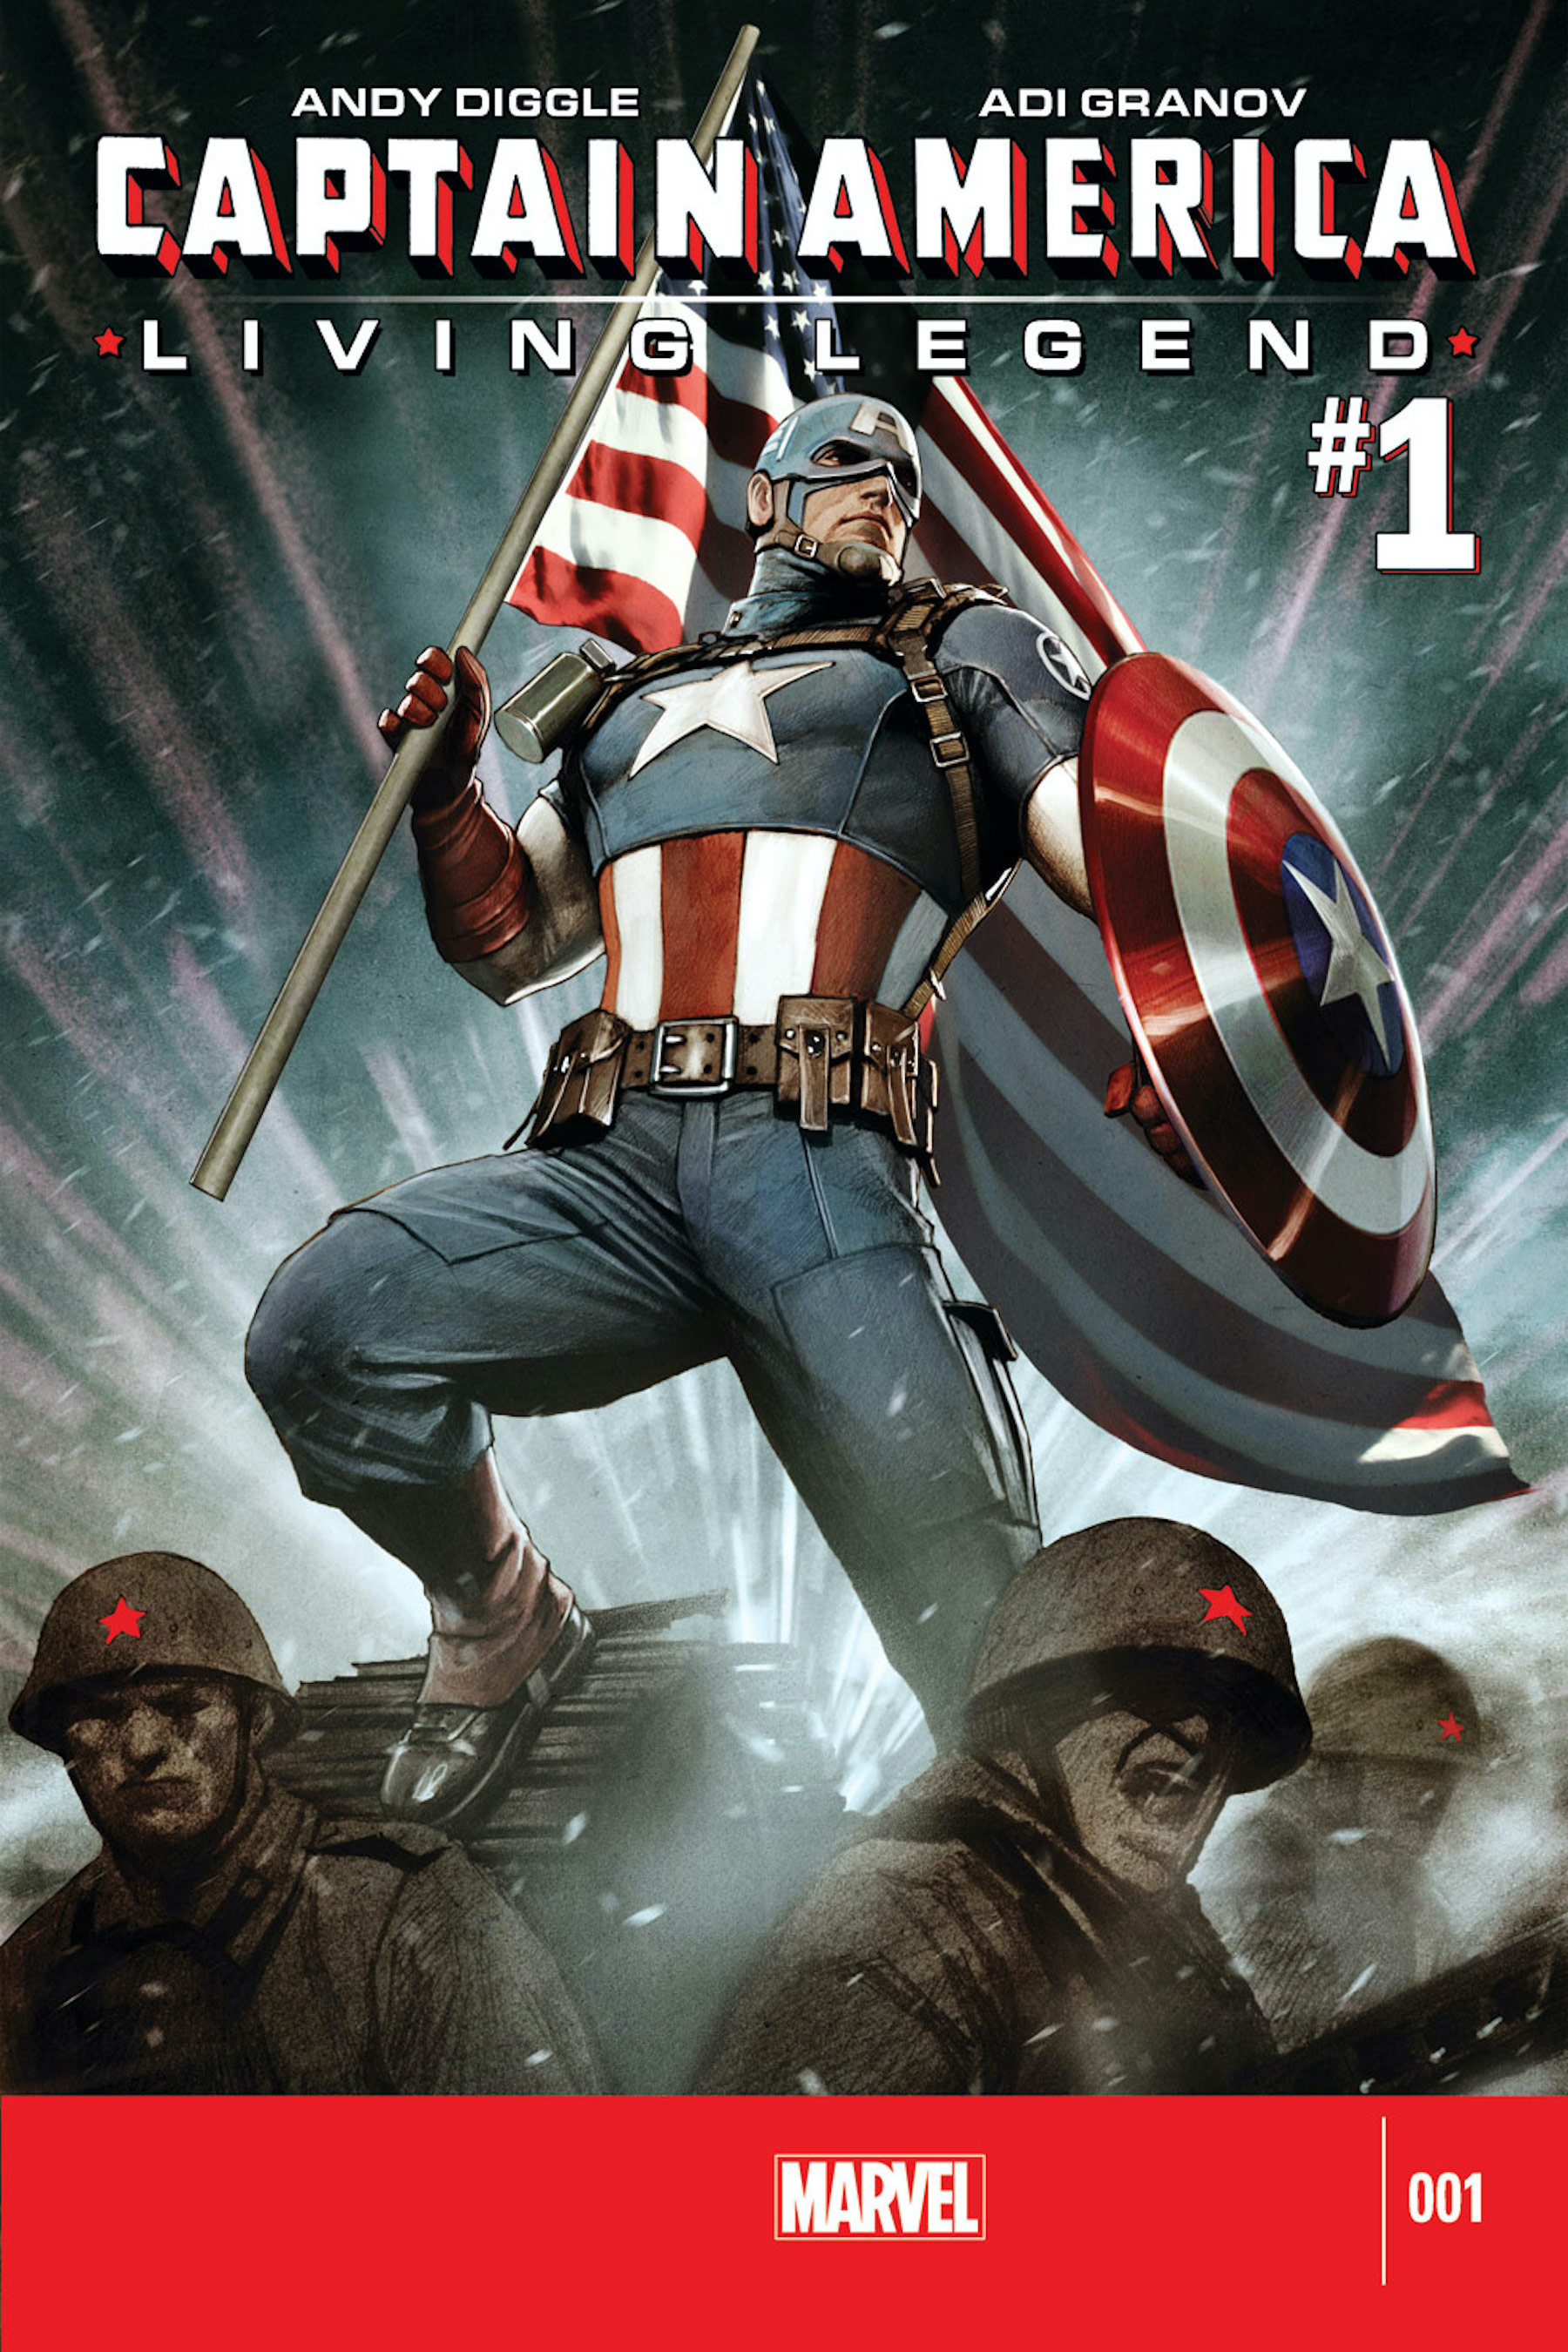 Zach Wilson by JL Giles and Ian Herring, after CAPTAIN AMERICA: LIVING LEGEND # 1 by Adi Granov